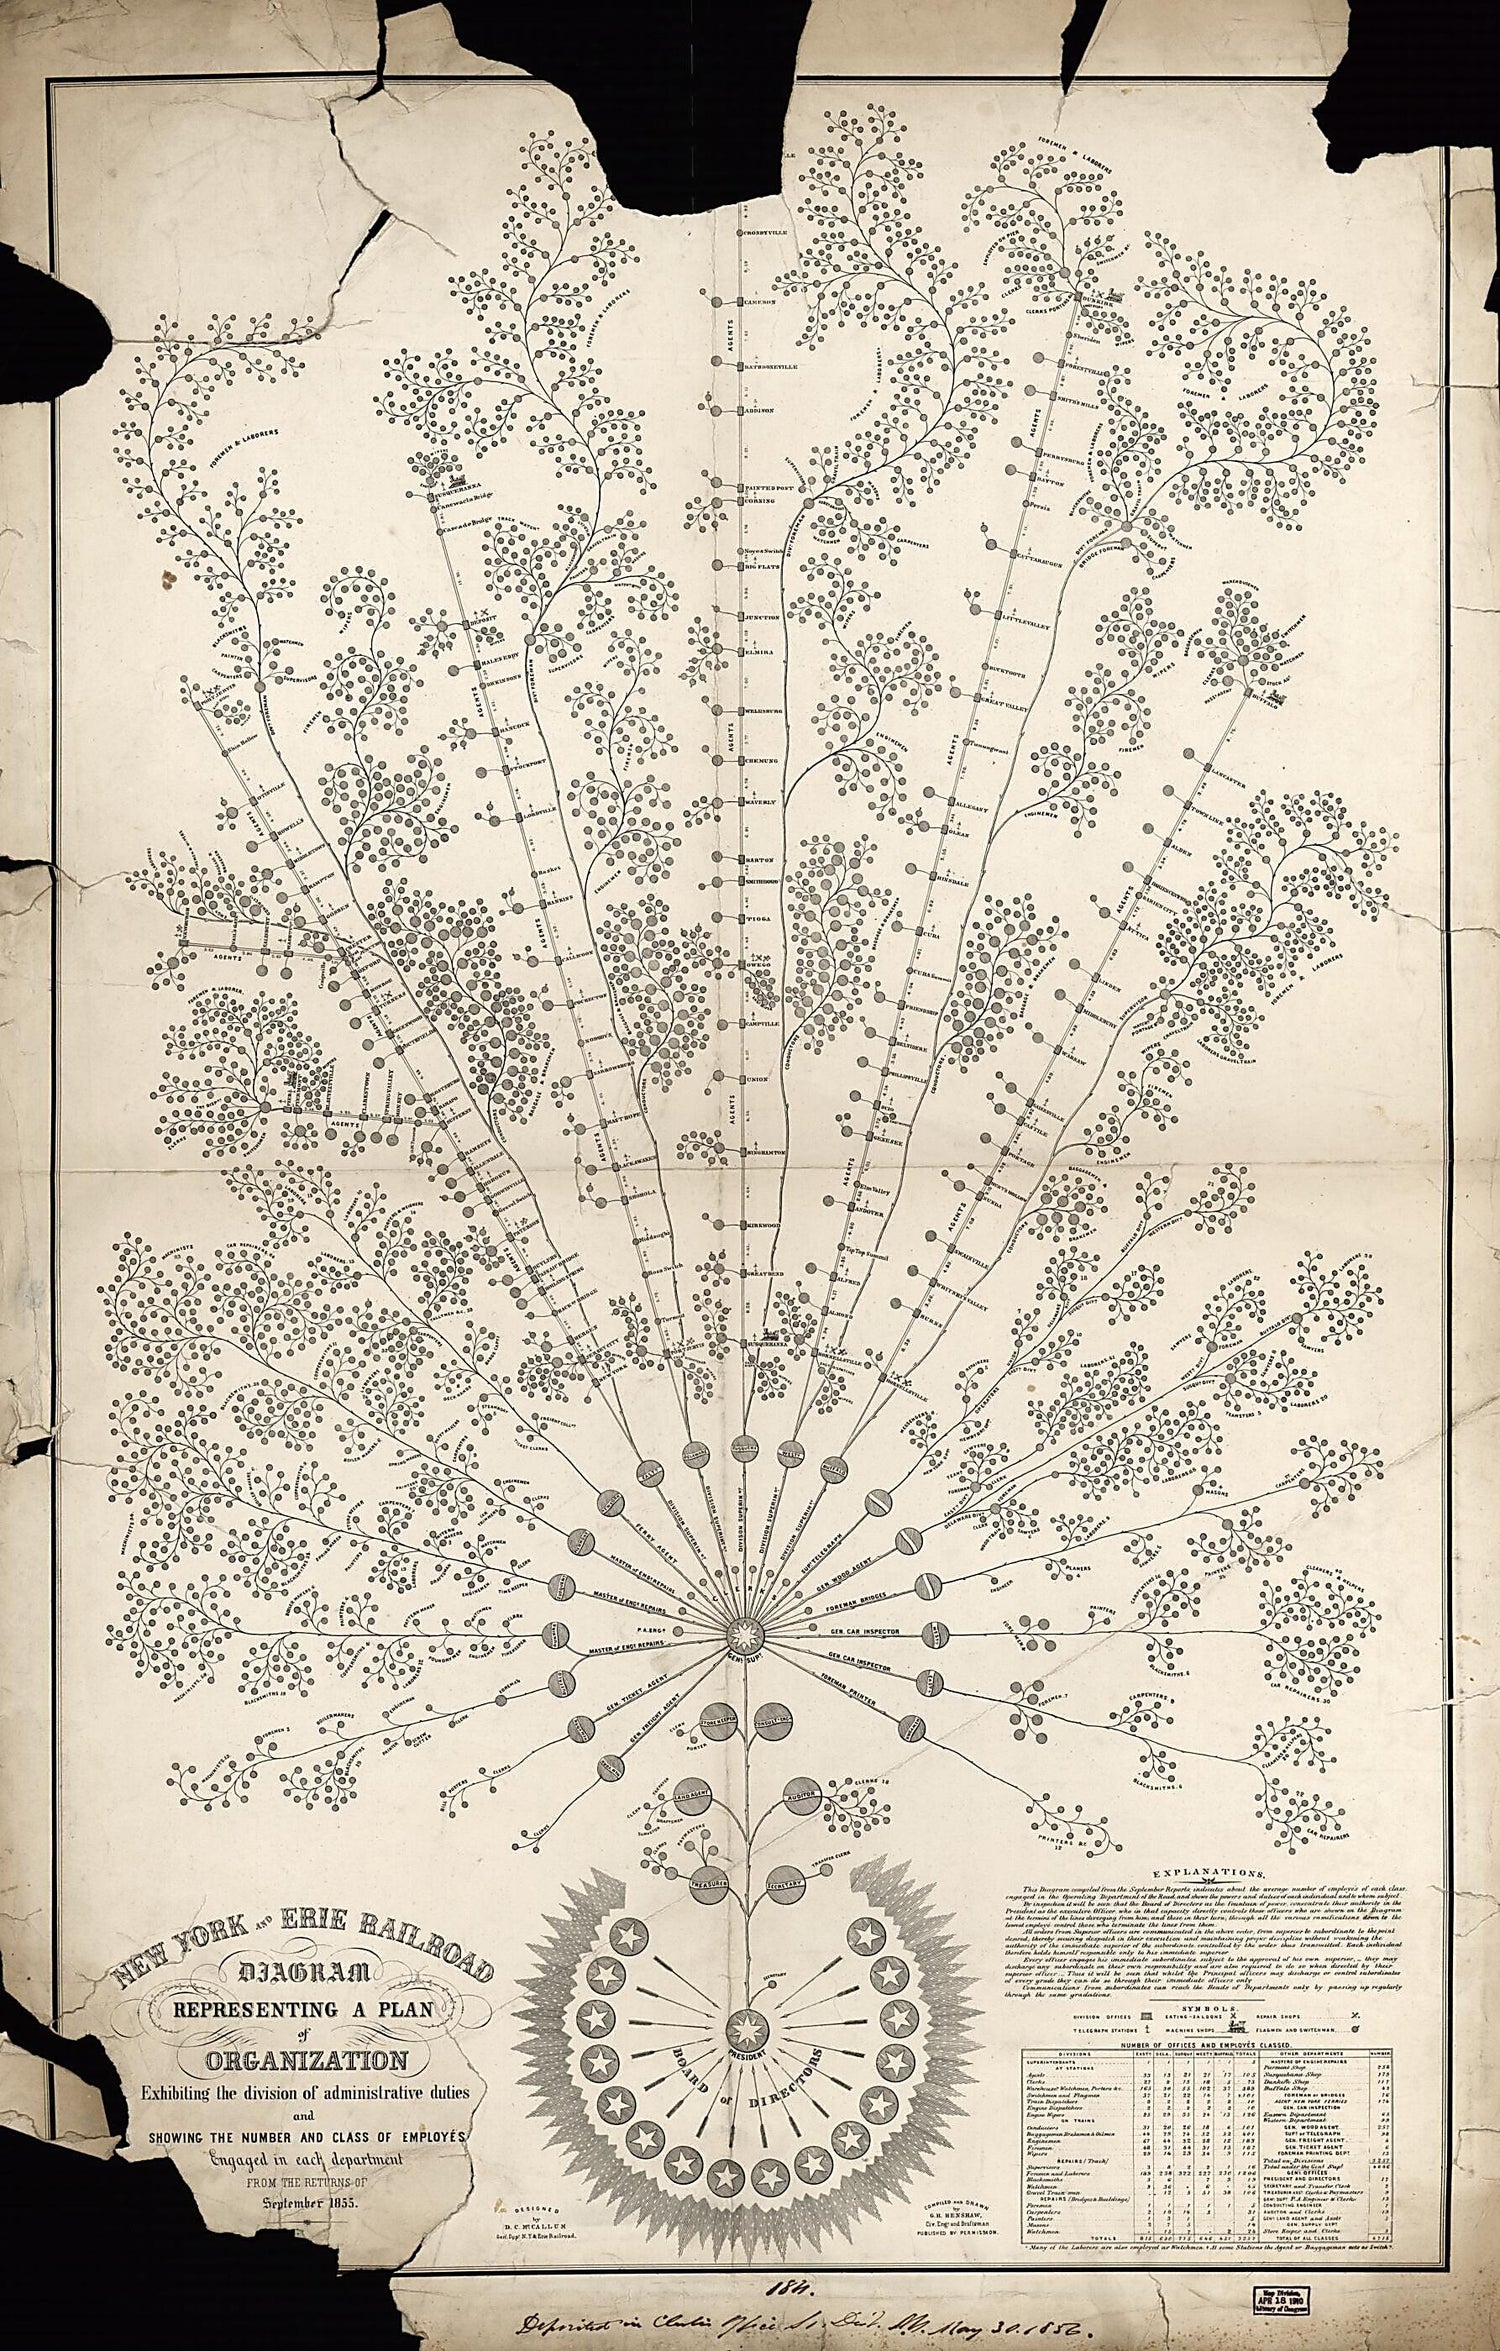 This old map of New York and Erie Railroad Diagram Representing a Plan of Organization : Exhibiting the Division of Academic Duties and Showing the Number and Class of Employés Engaged In Each Department : from the Returns of September from 1855 was cre